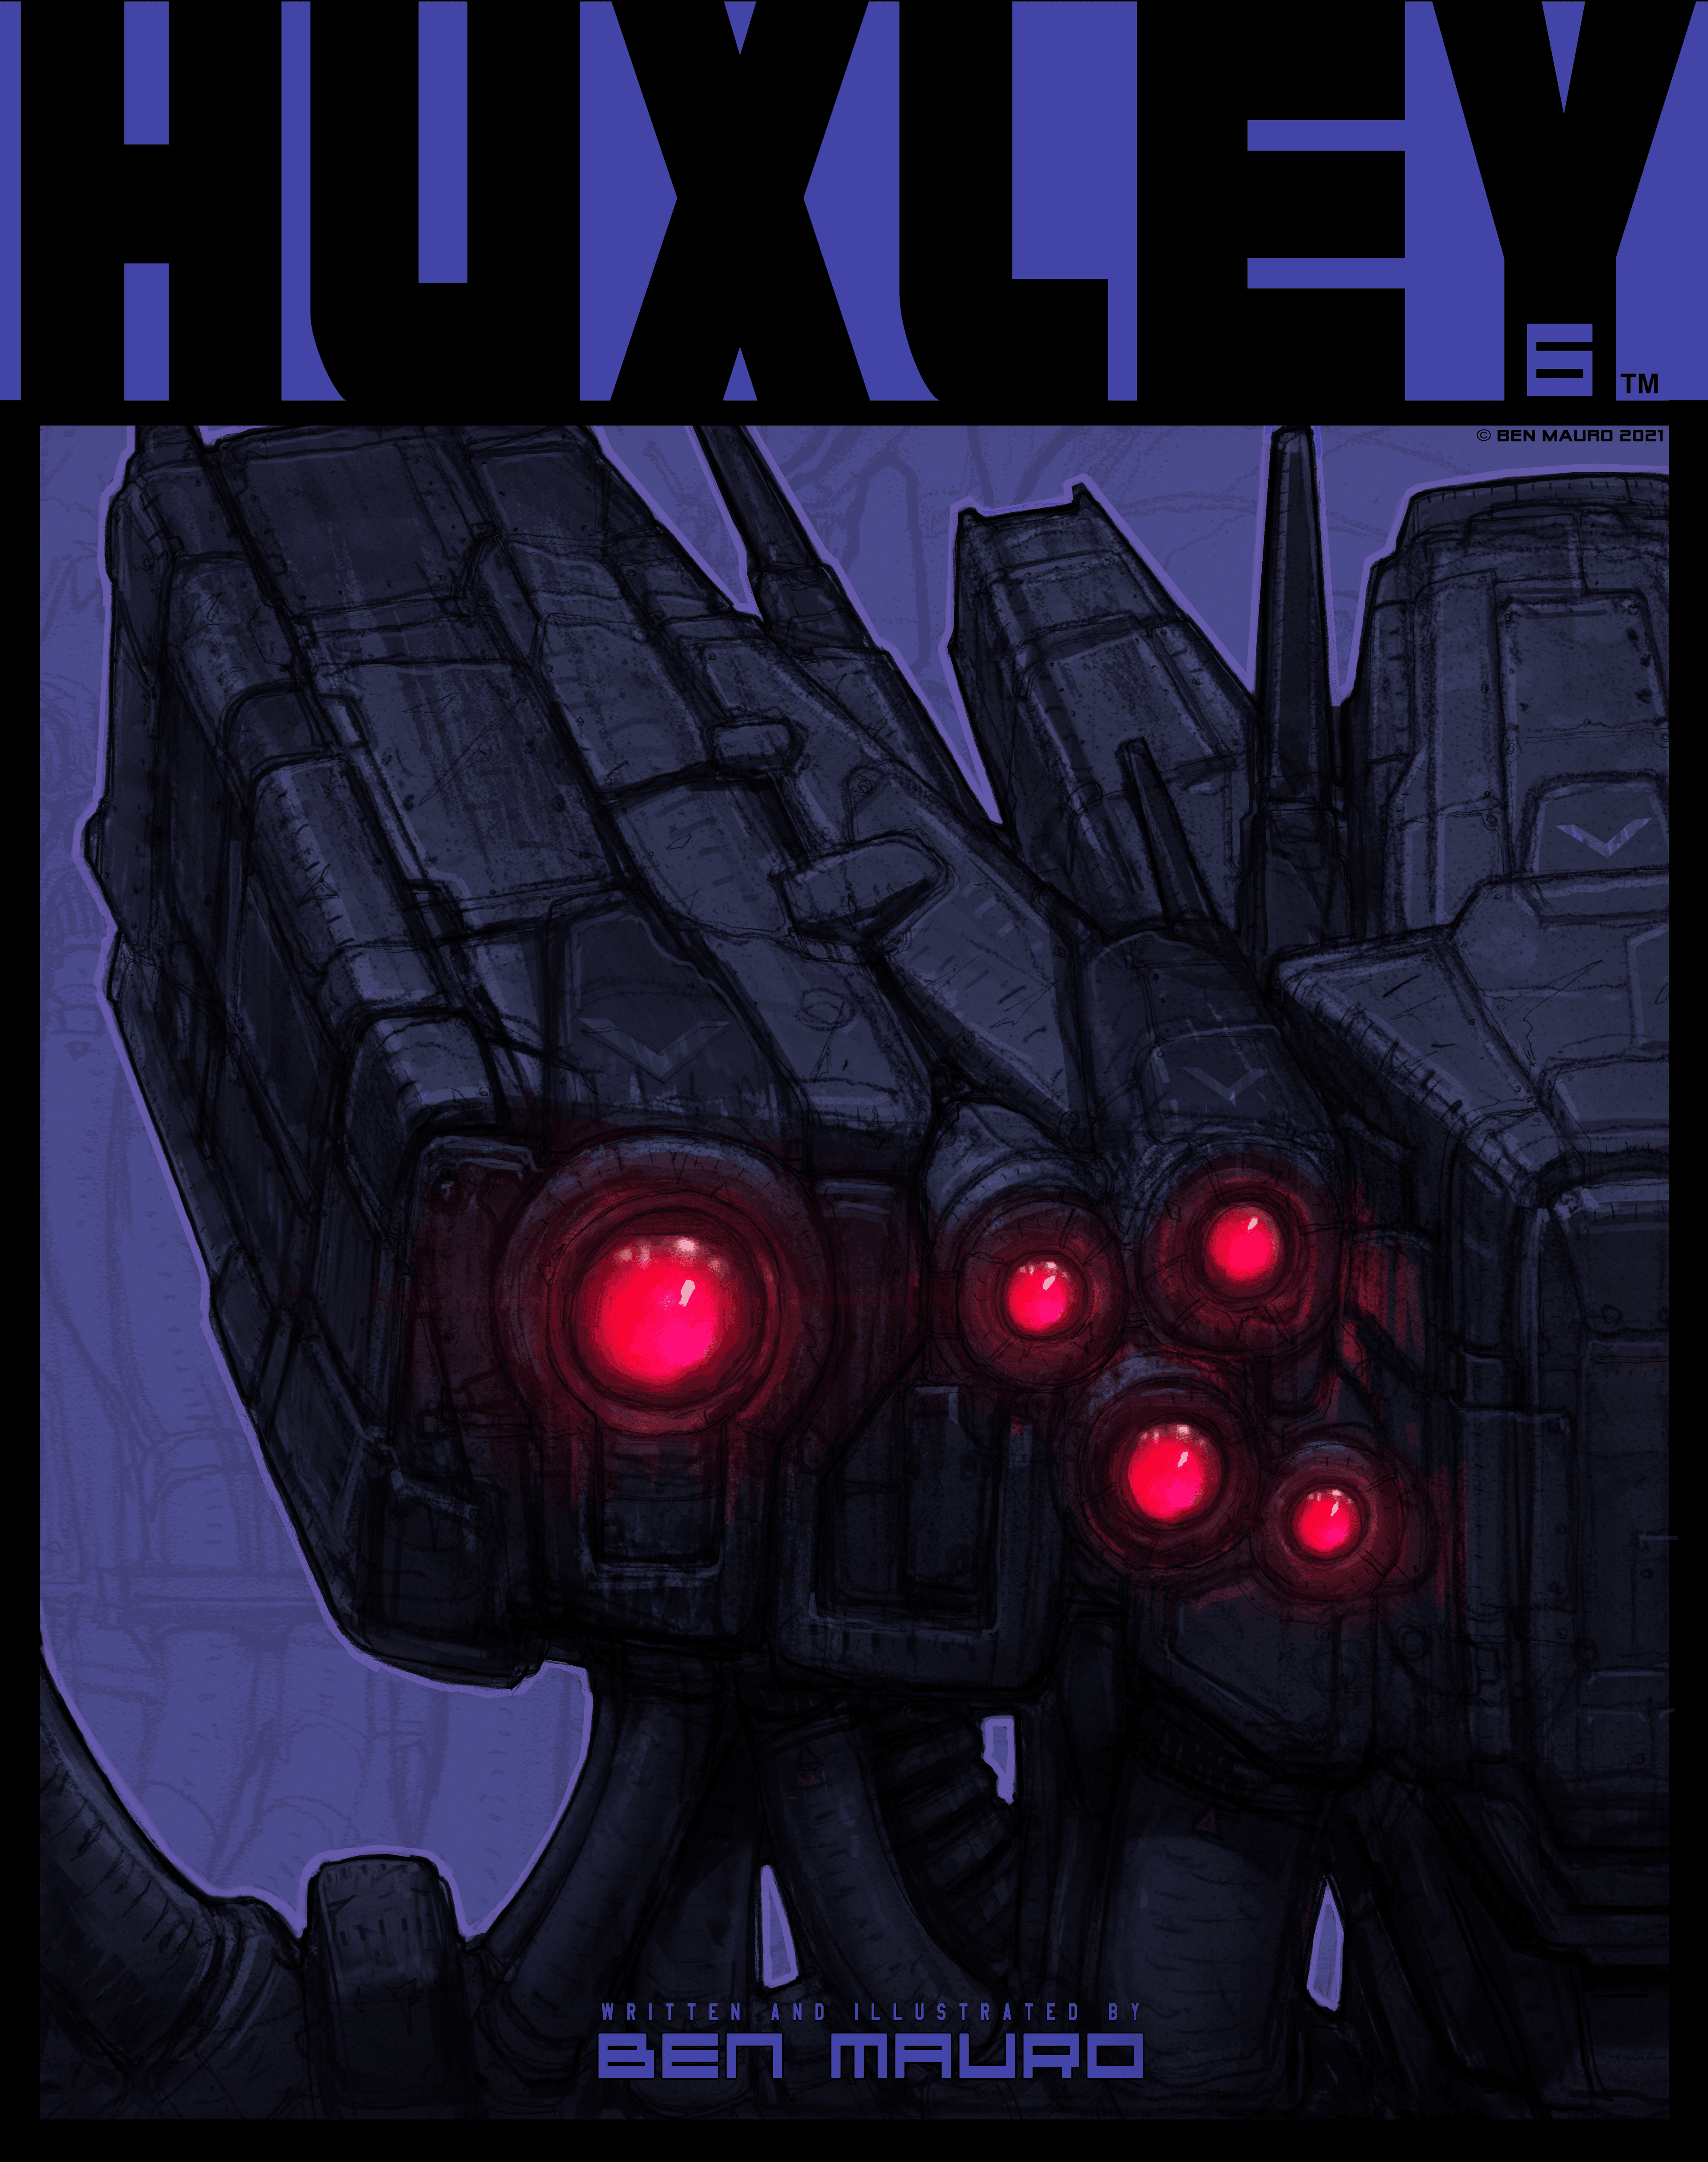 HUXLEY Comic: Issue 6 - First Edition - #2601